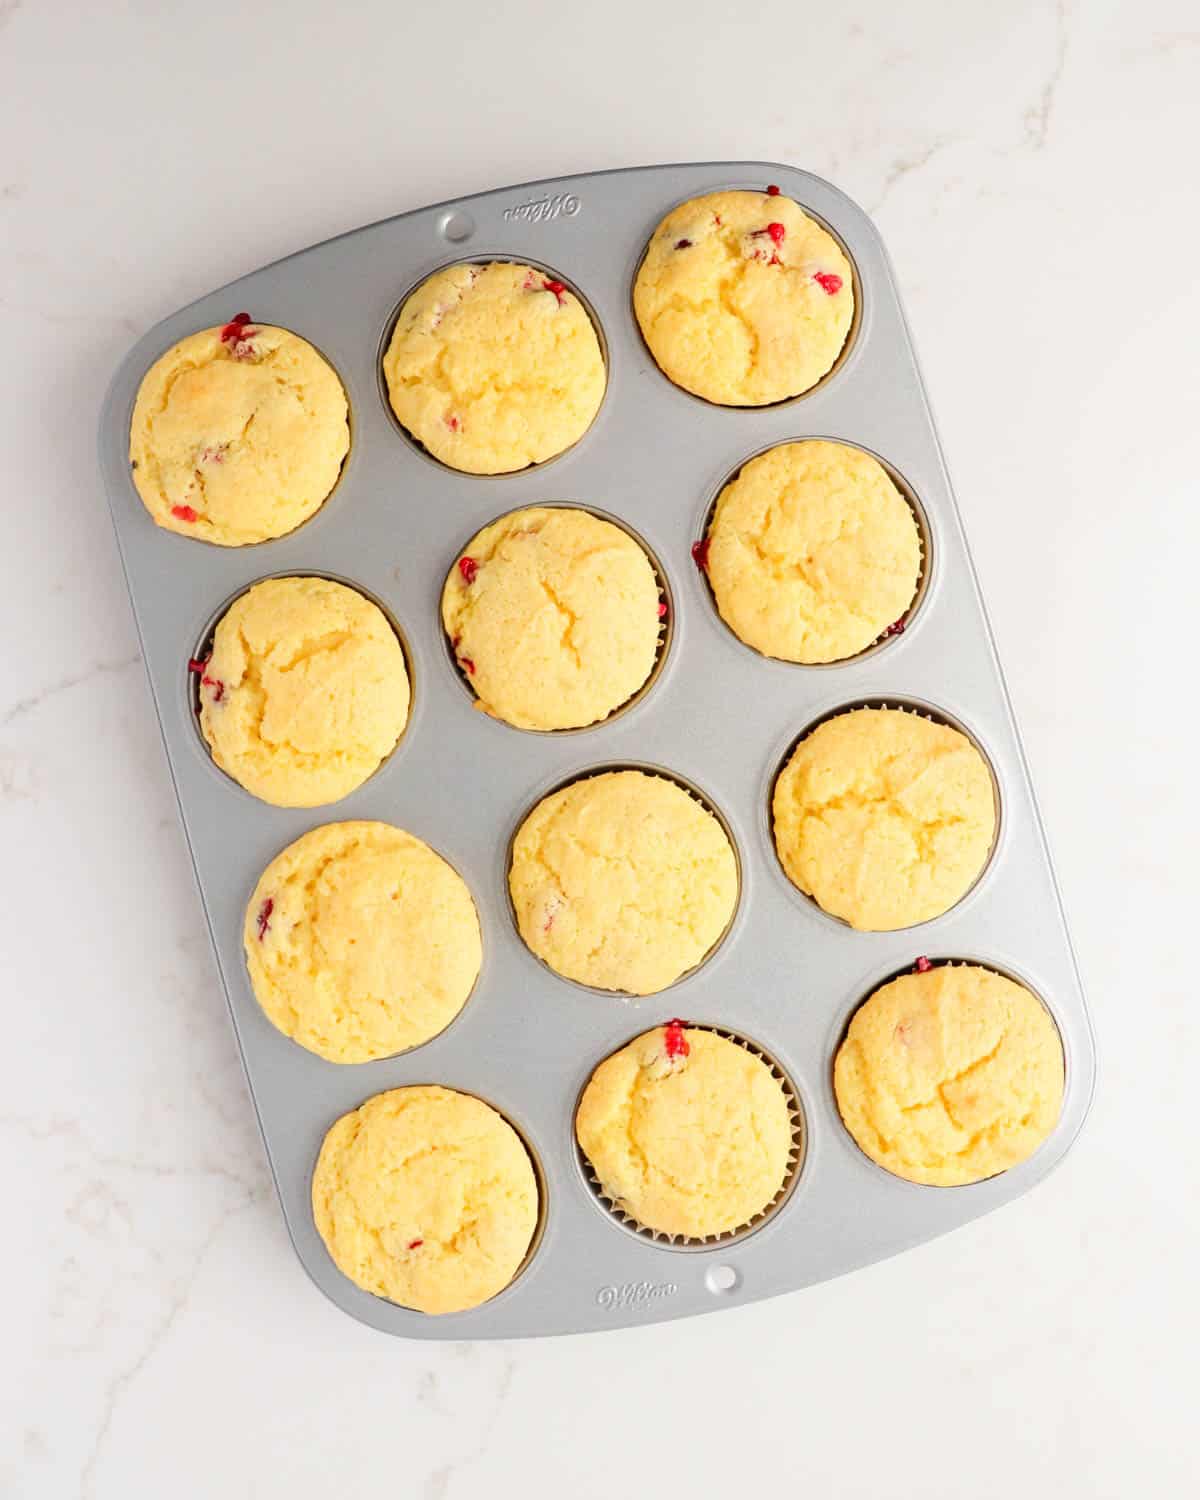 Baked muffins in a muffin tin.